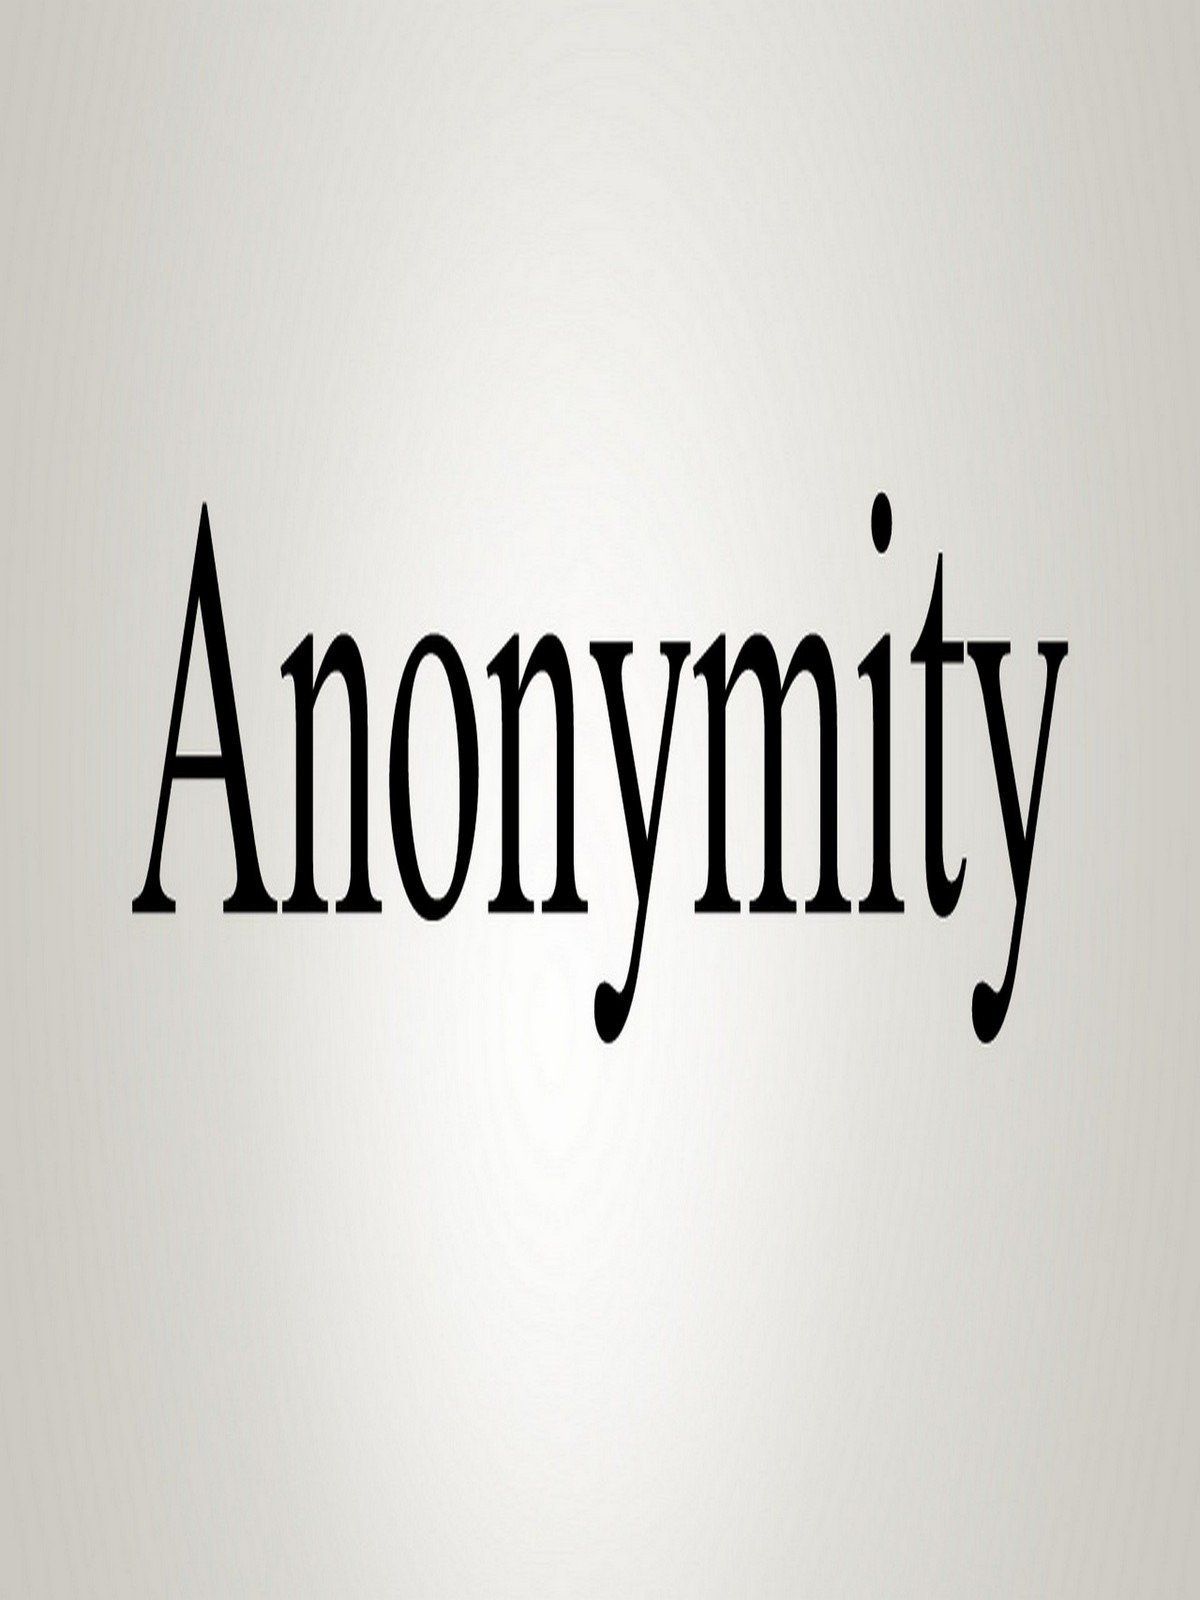 How to pronounce anonymity  photo